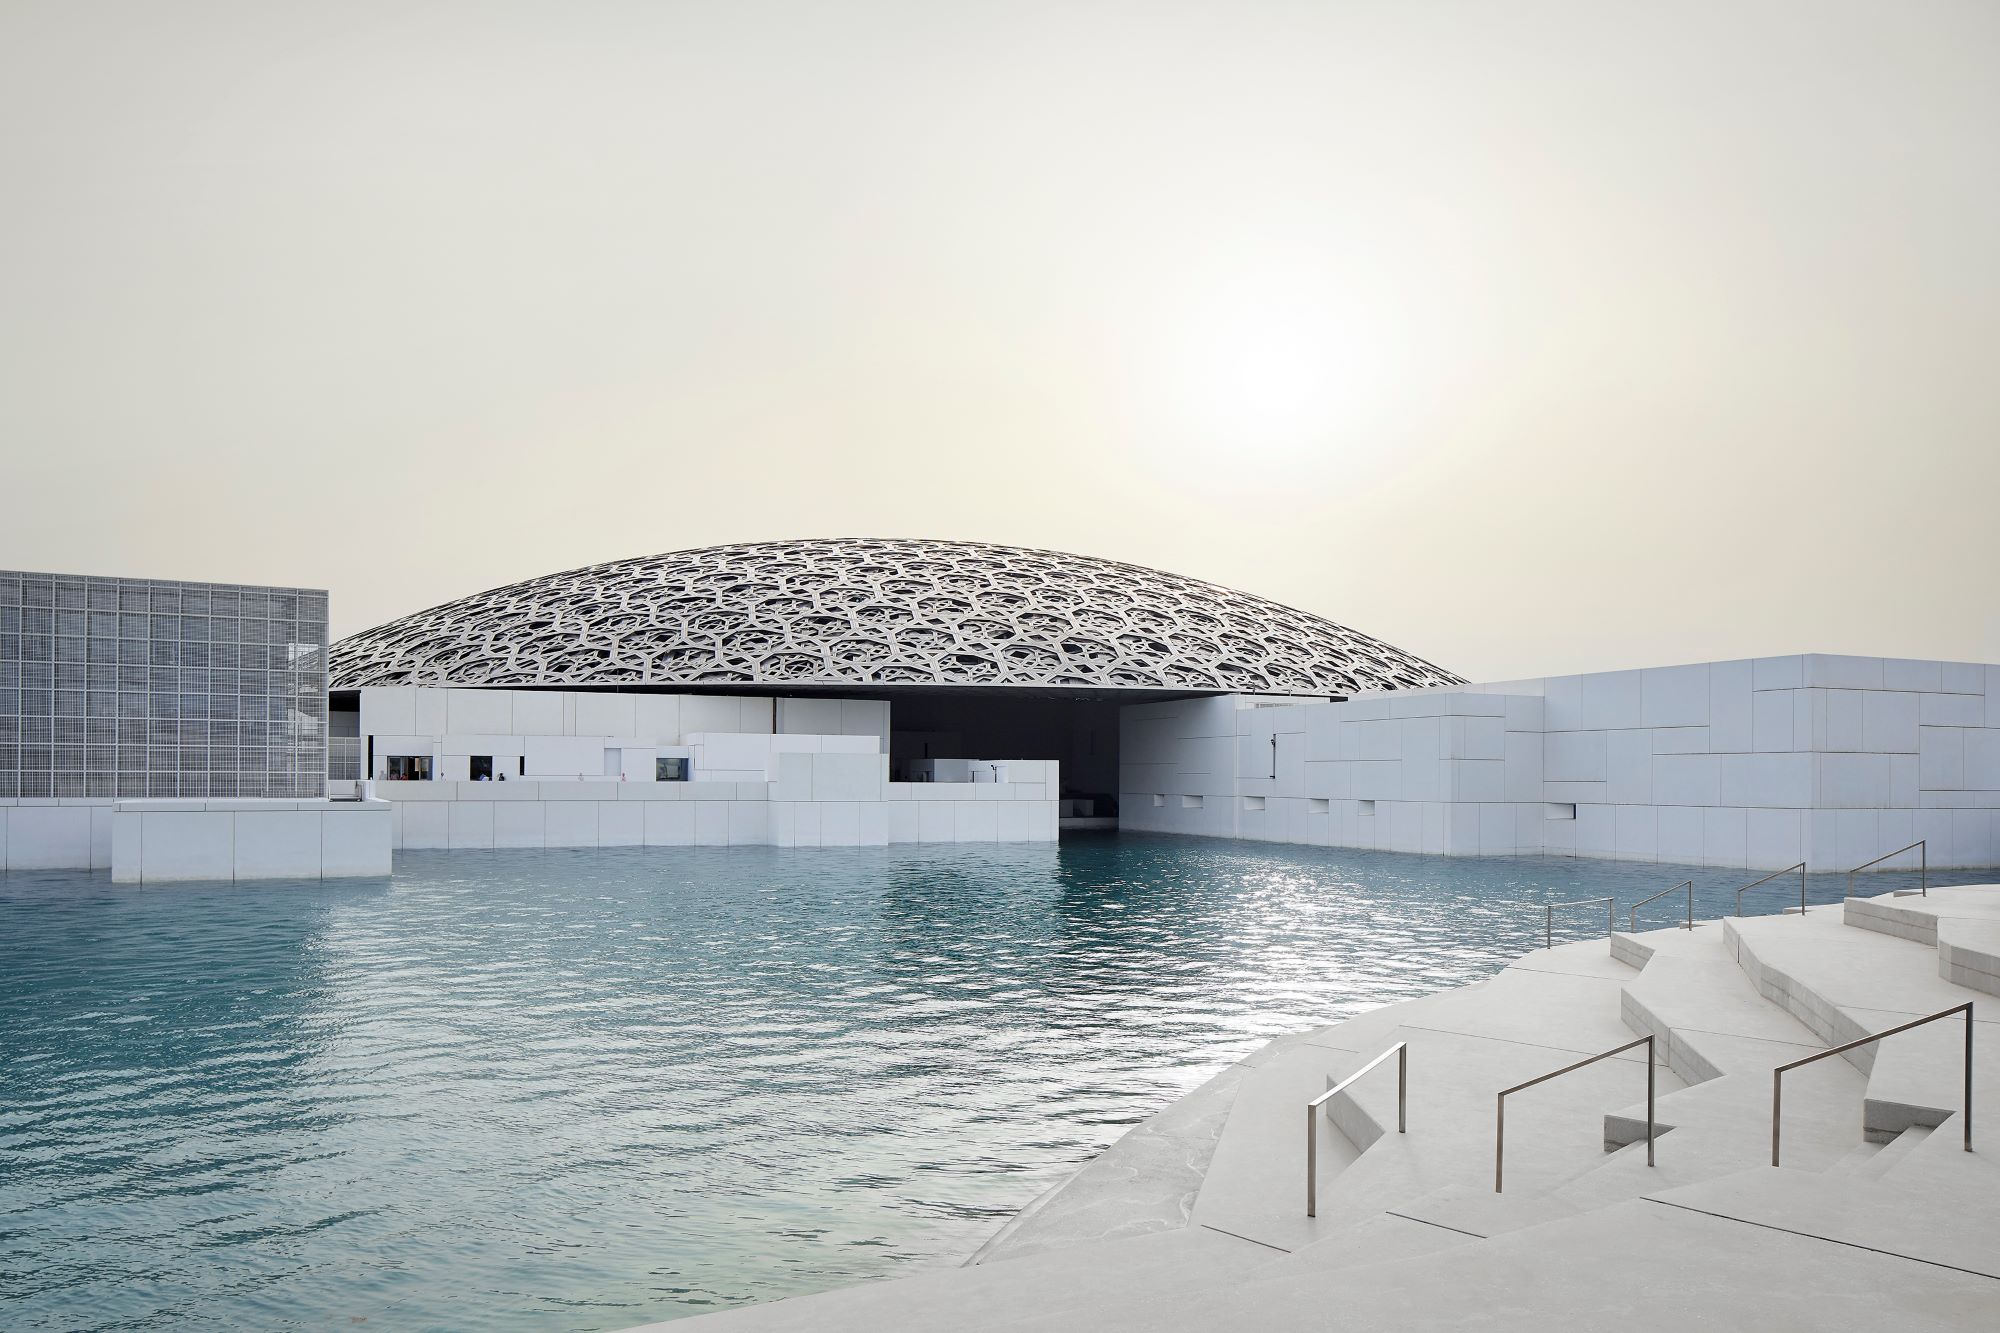 Louvre Abu Dhabi To Re-Open June 24